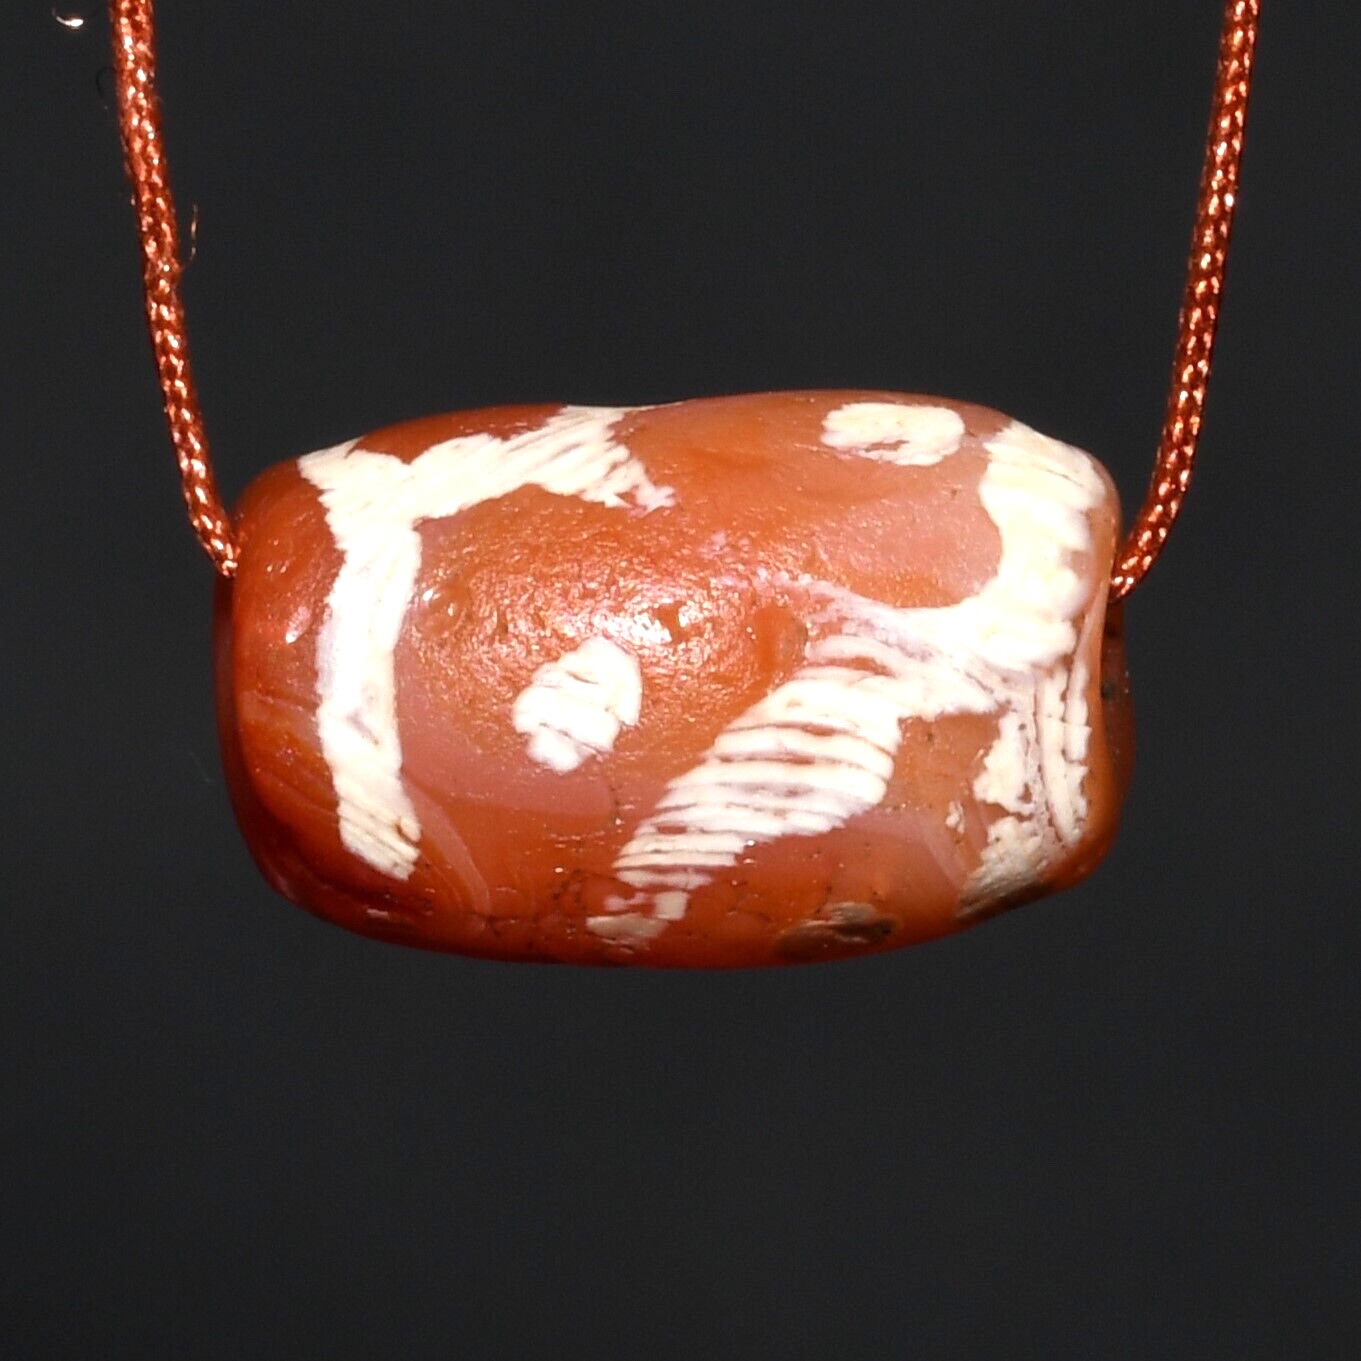 Genuine Large Ancient Central Asian Etched Carnelian Bead over 1200 Years Old